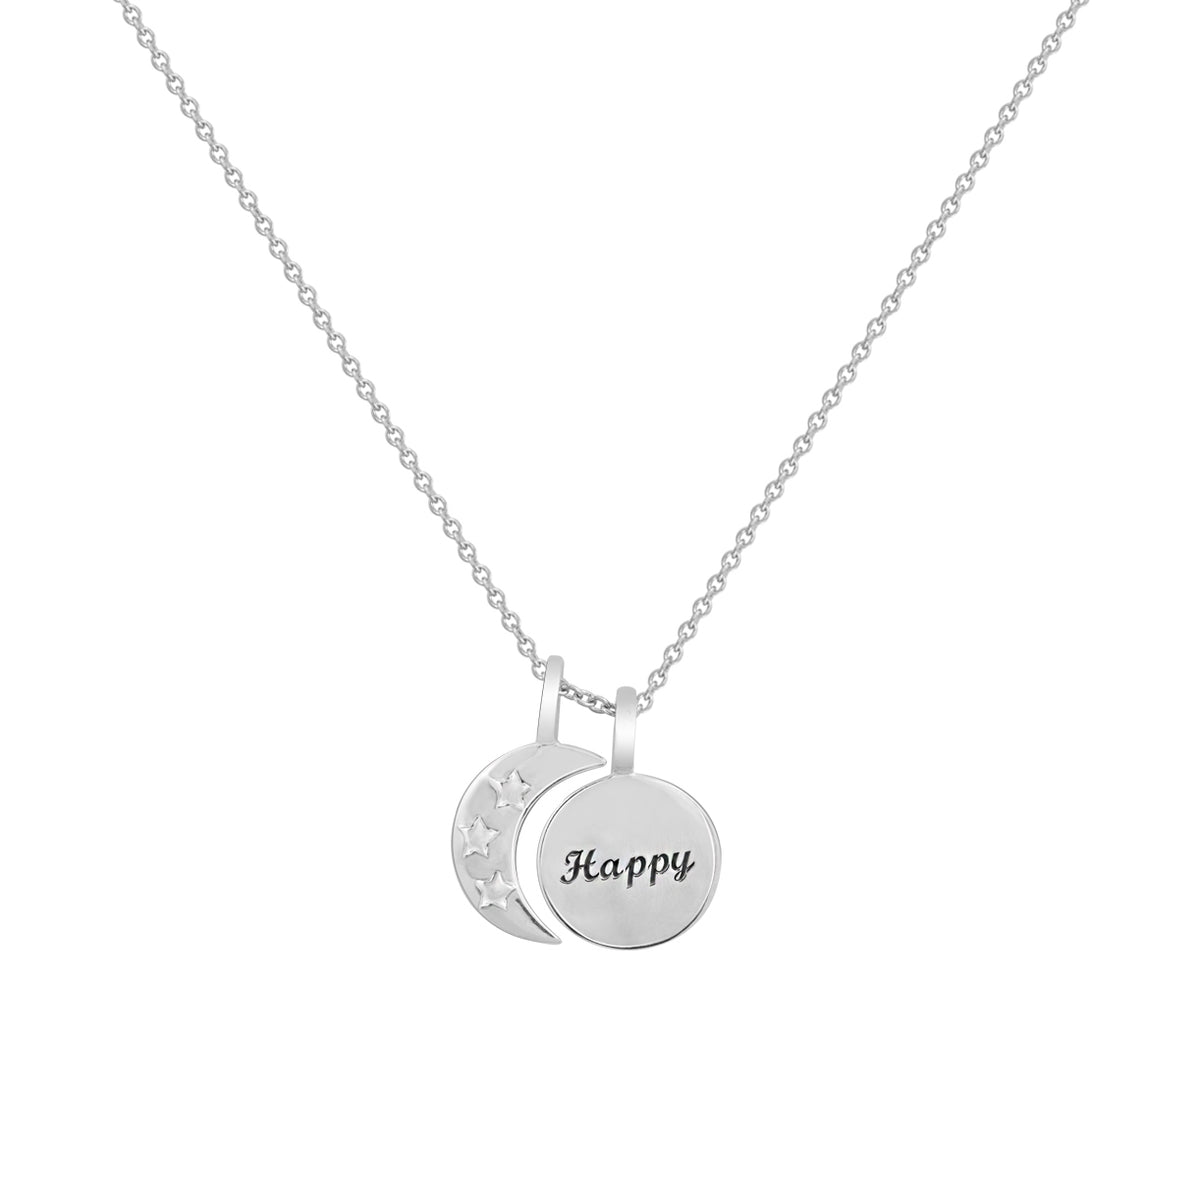 Personalized Name in Moon and Star Pendant Necklace